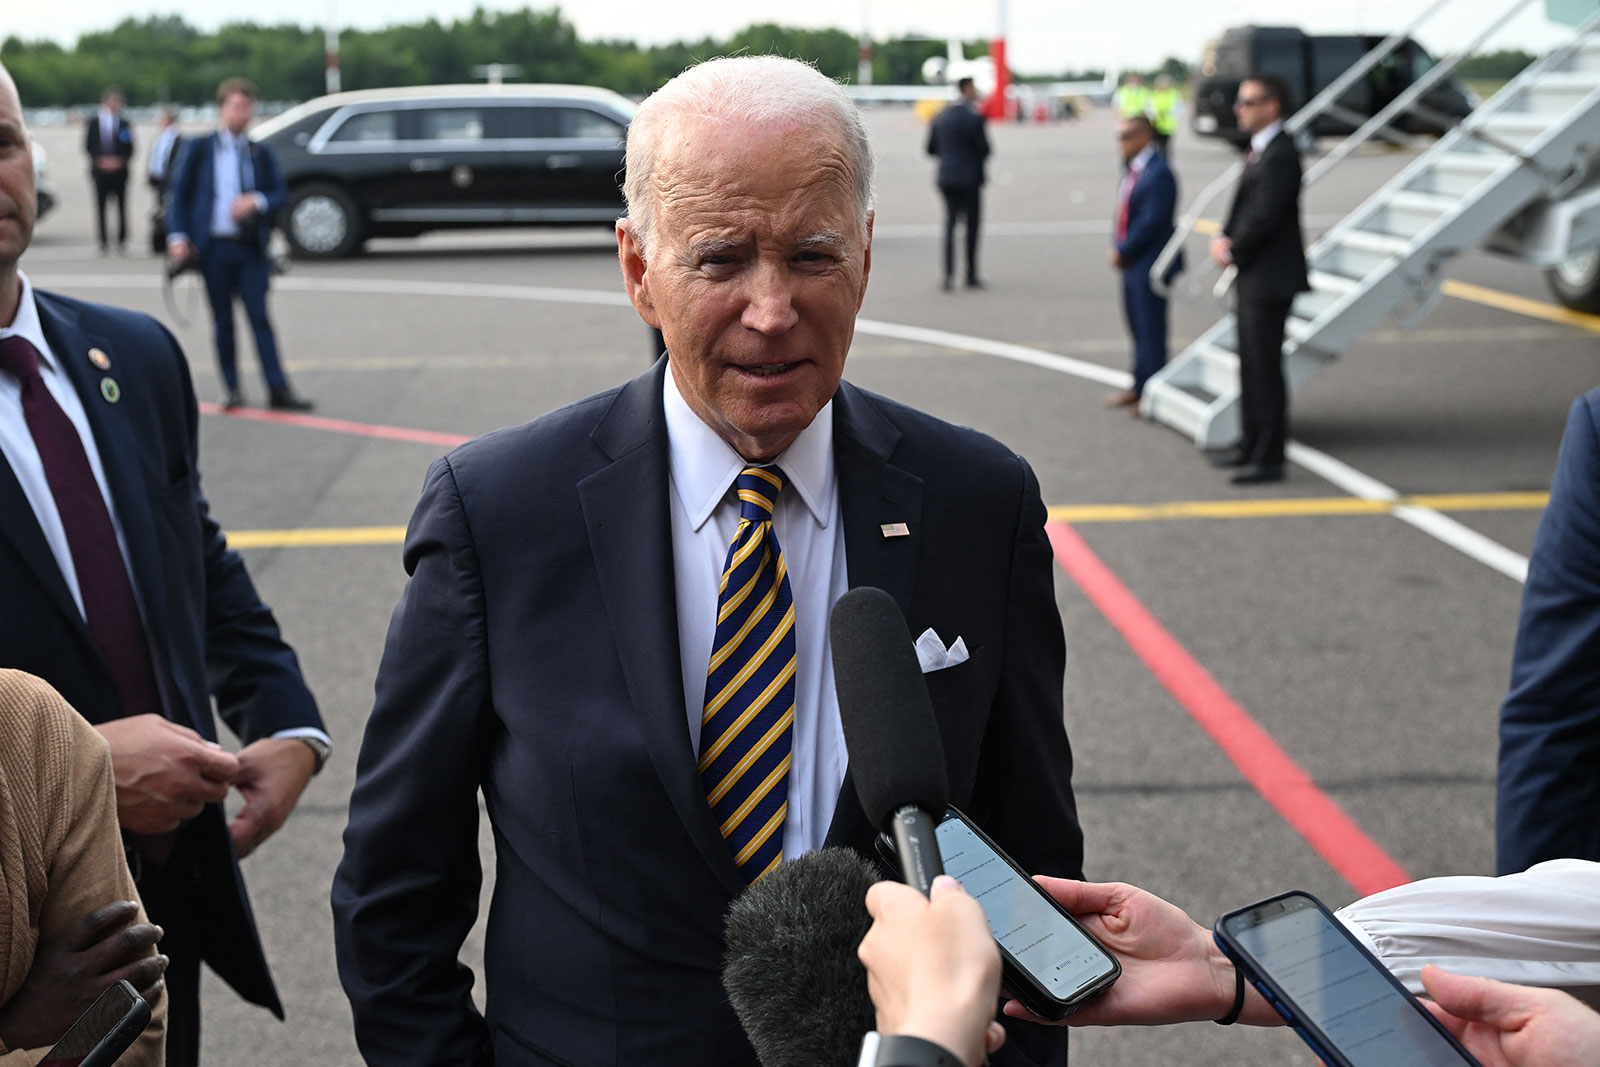 US President Joe Biden answers questions from the press prior to boarding at the Vilnius International Airport in Vilnius, Lithuania, on Wednesday.